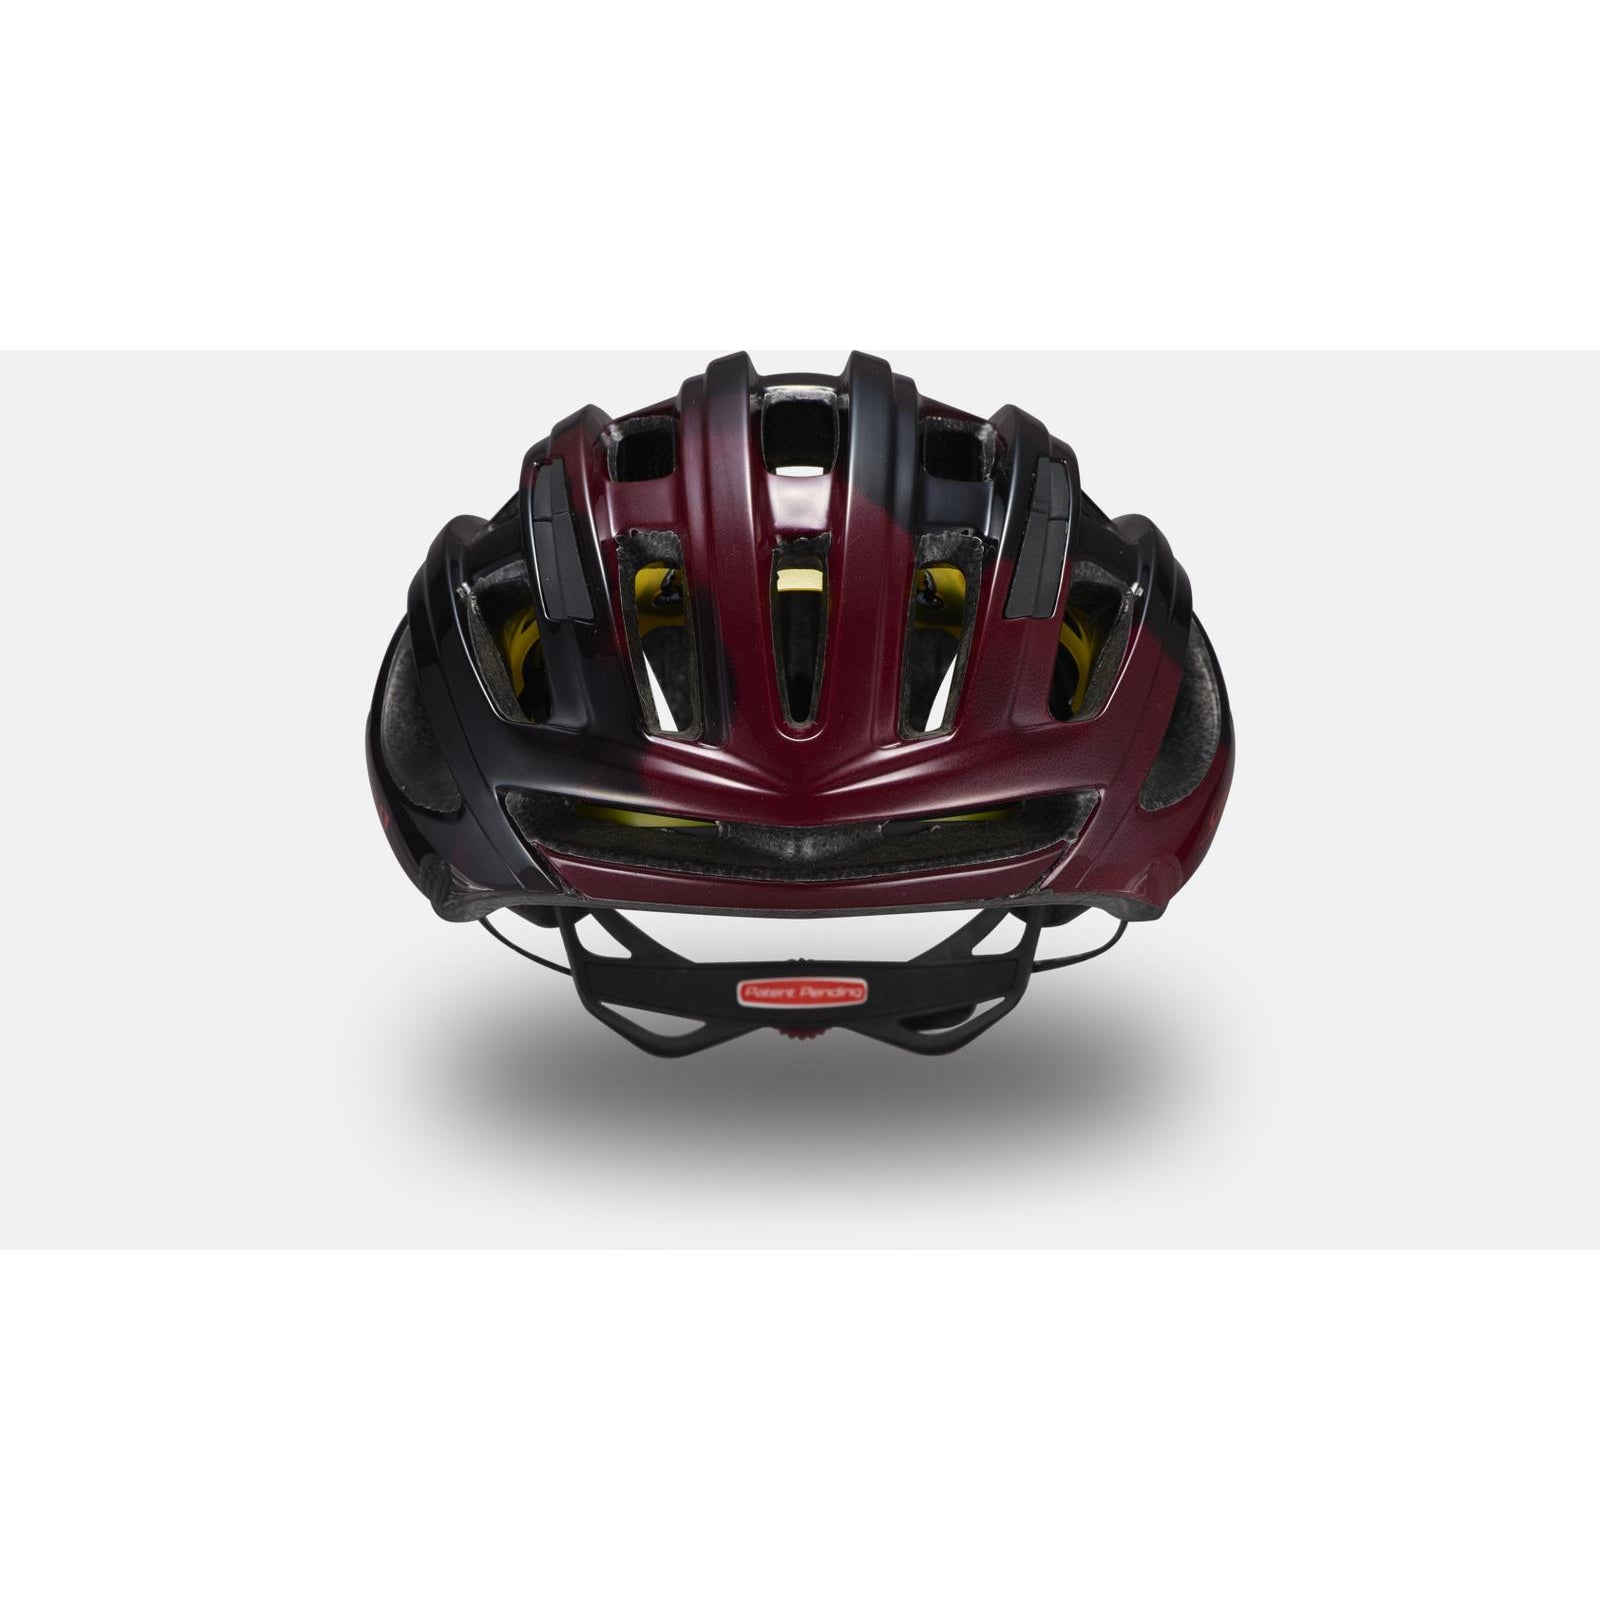 Specialized Propero III - Helmets - Bicycle Warehouse